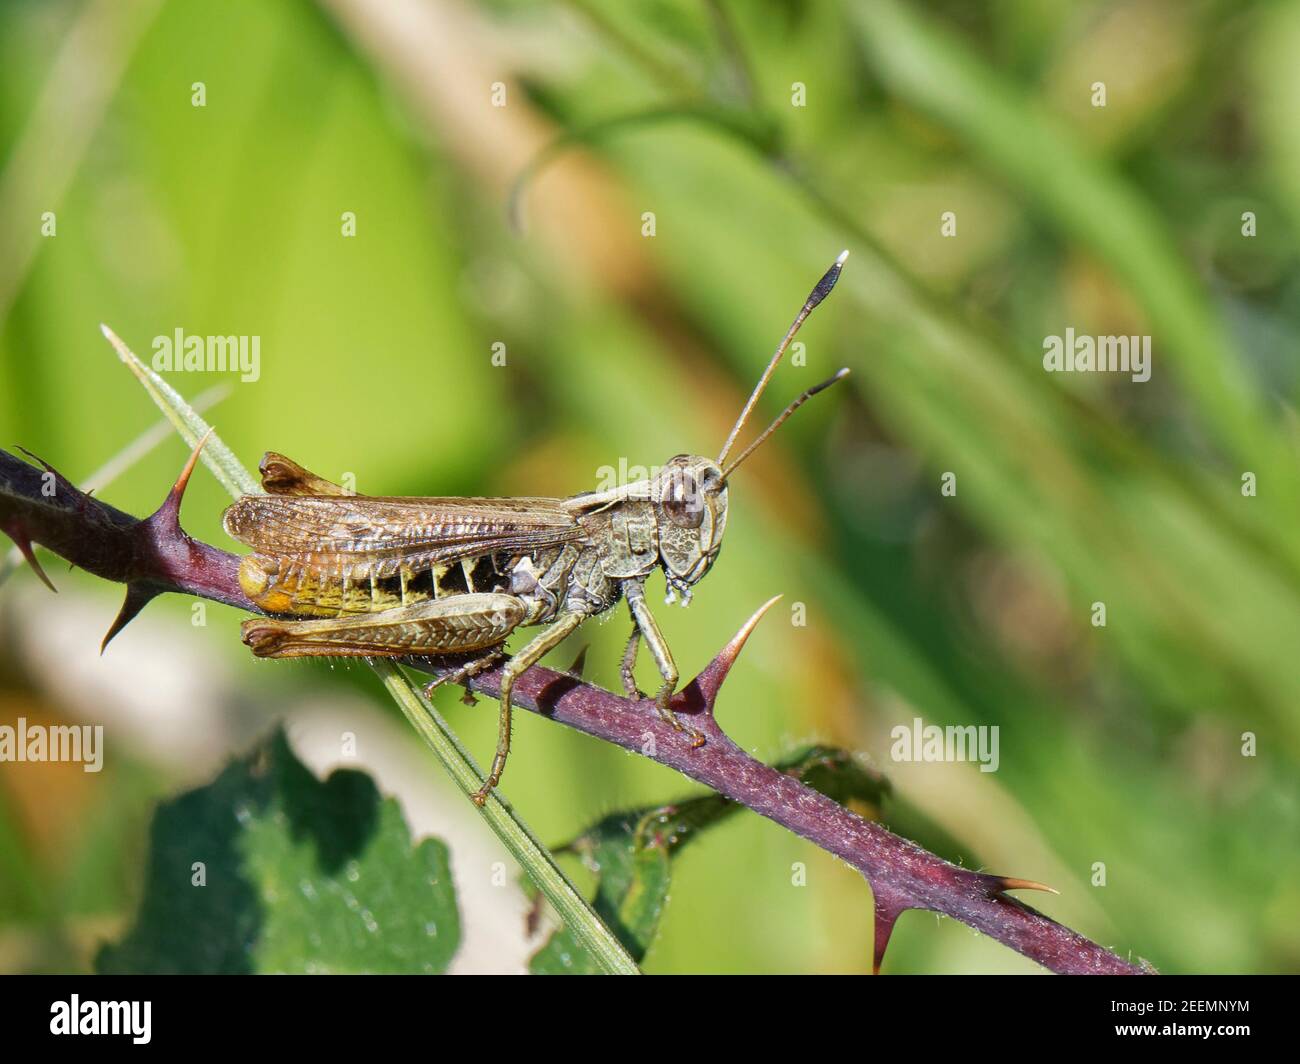 Rufous grasshopper (Gomphocerippus rufus) male, a nationally scarce species in the UK with distinctive white-tipped antennae, resting on a Bramble UK. Stock Photo